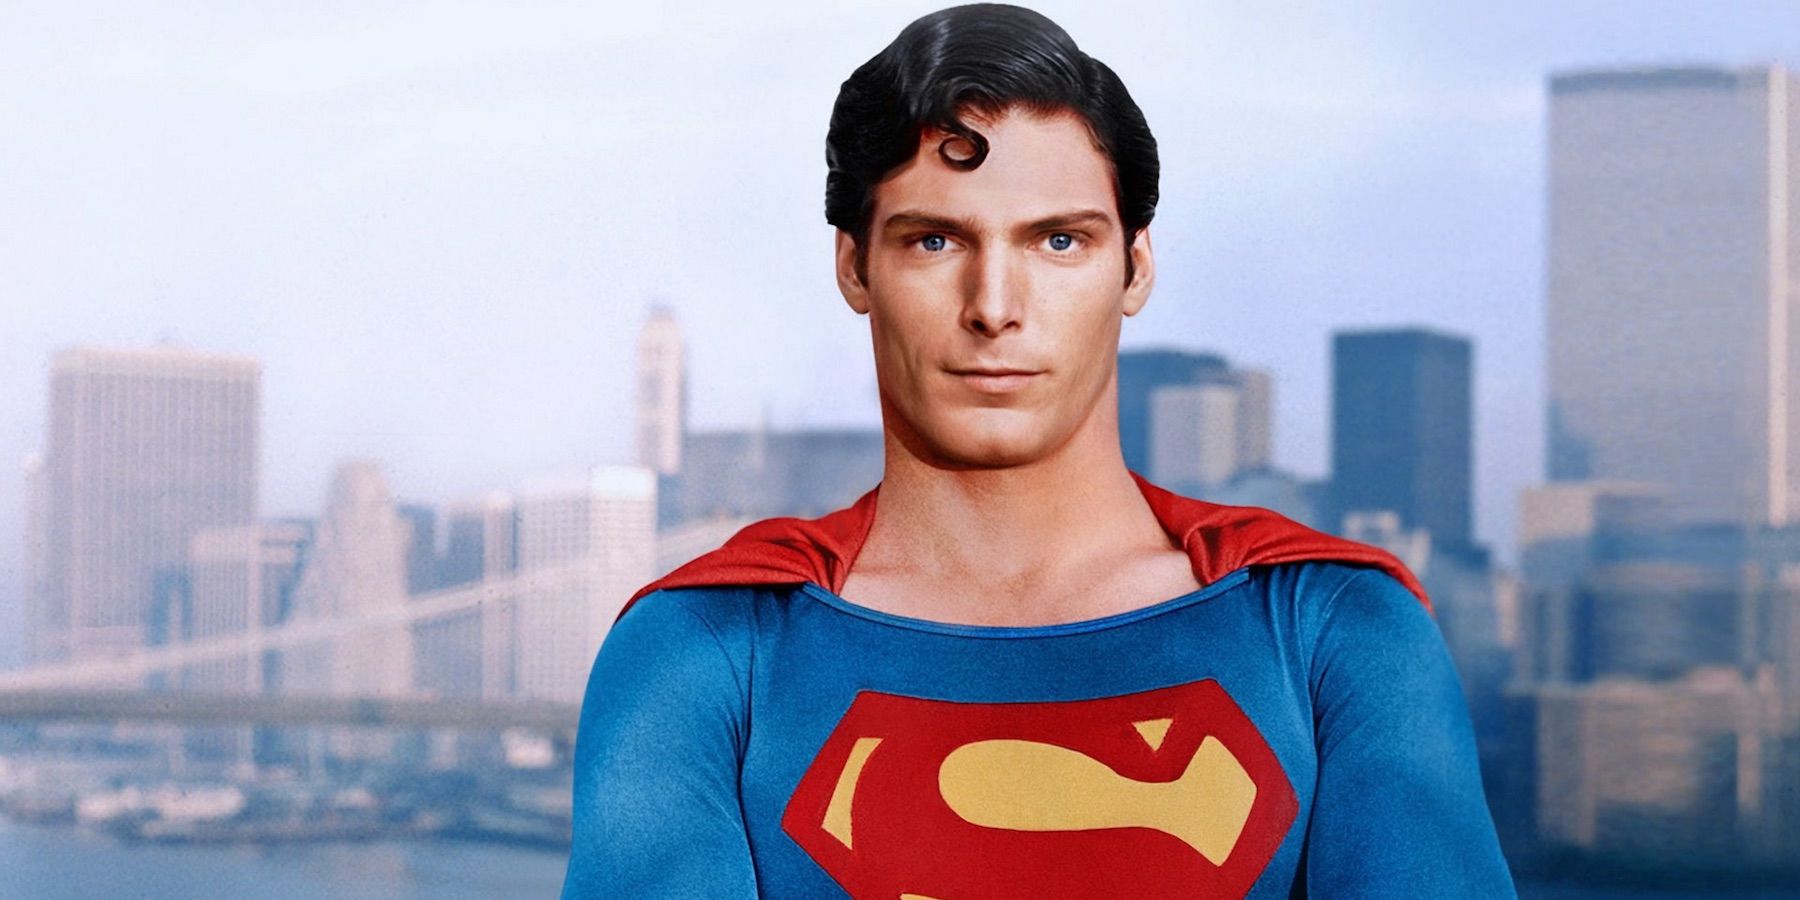 Christopher Reeve as Superman standing in front of a city skyline.